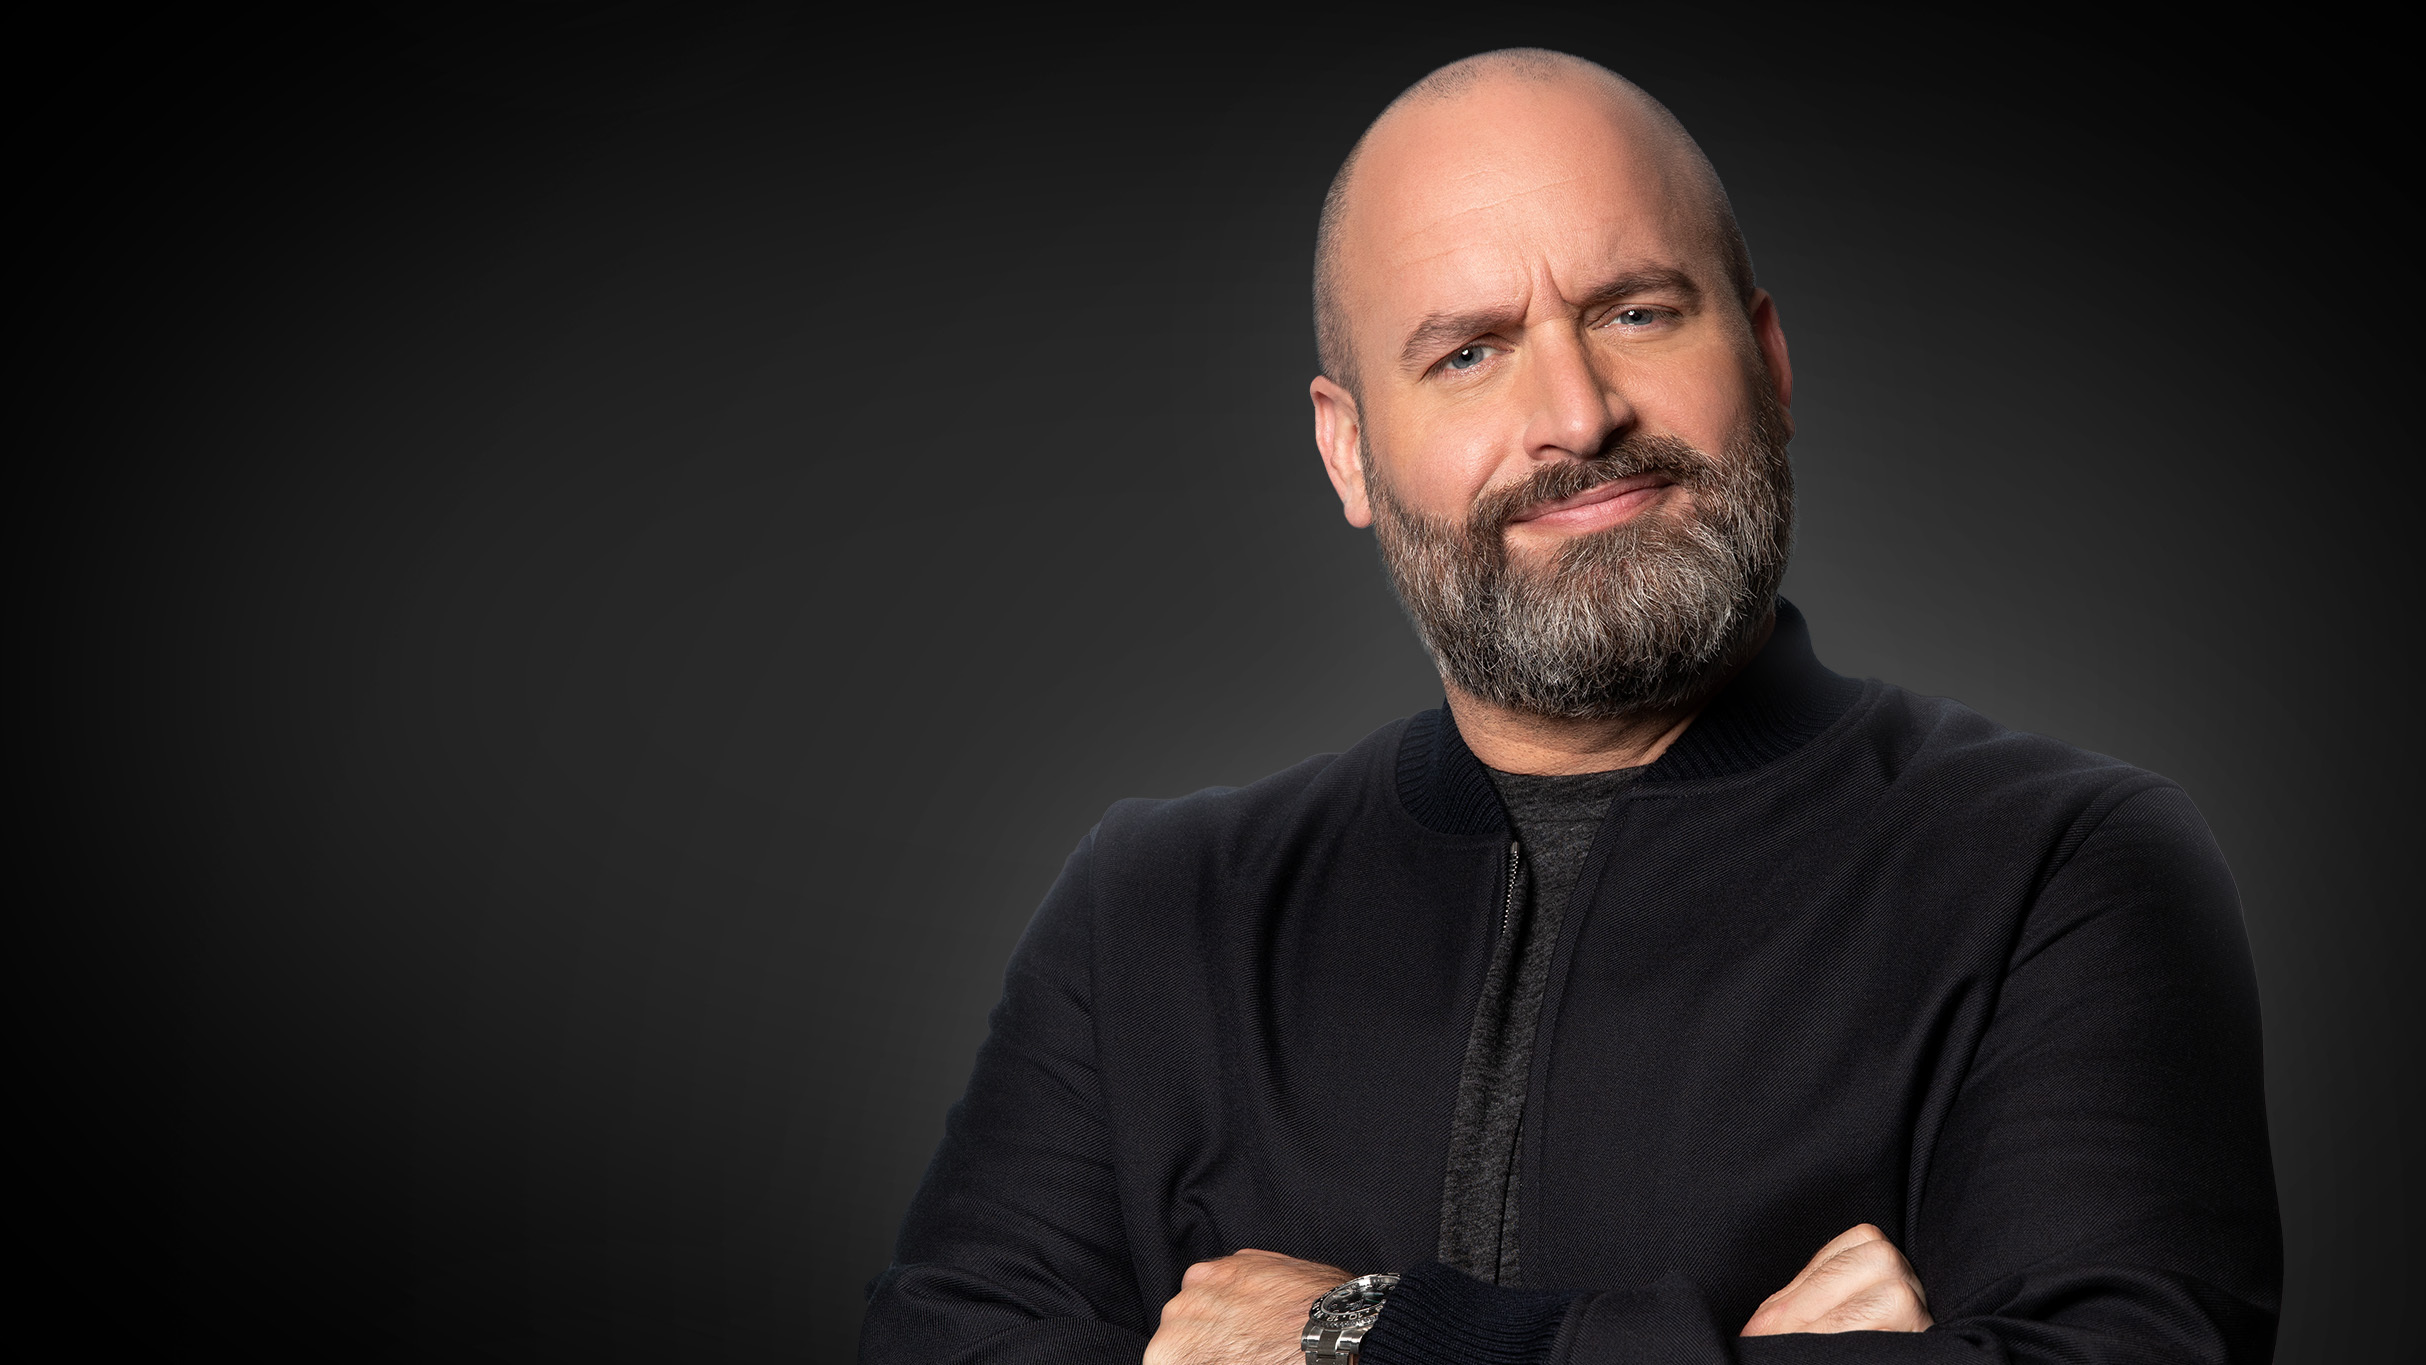 Actor, comedian and writer Tom Segura performs at WHBPAC on August 28. COURTESY WHBPAC